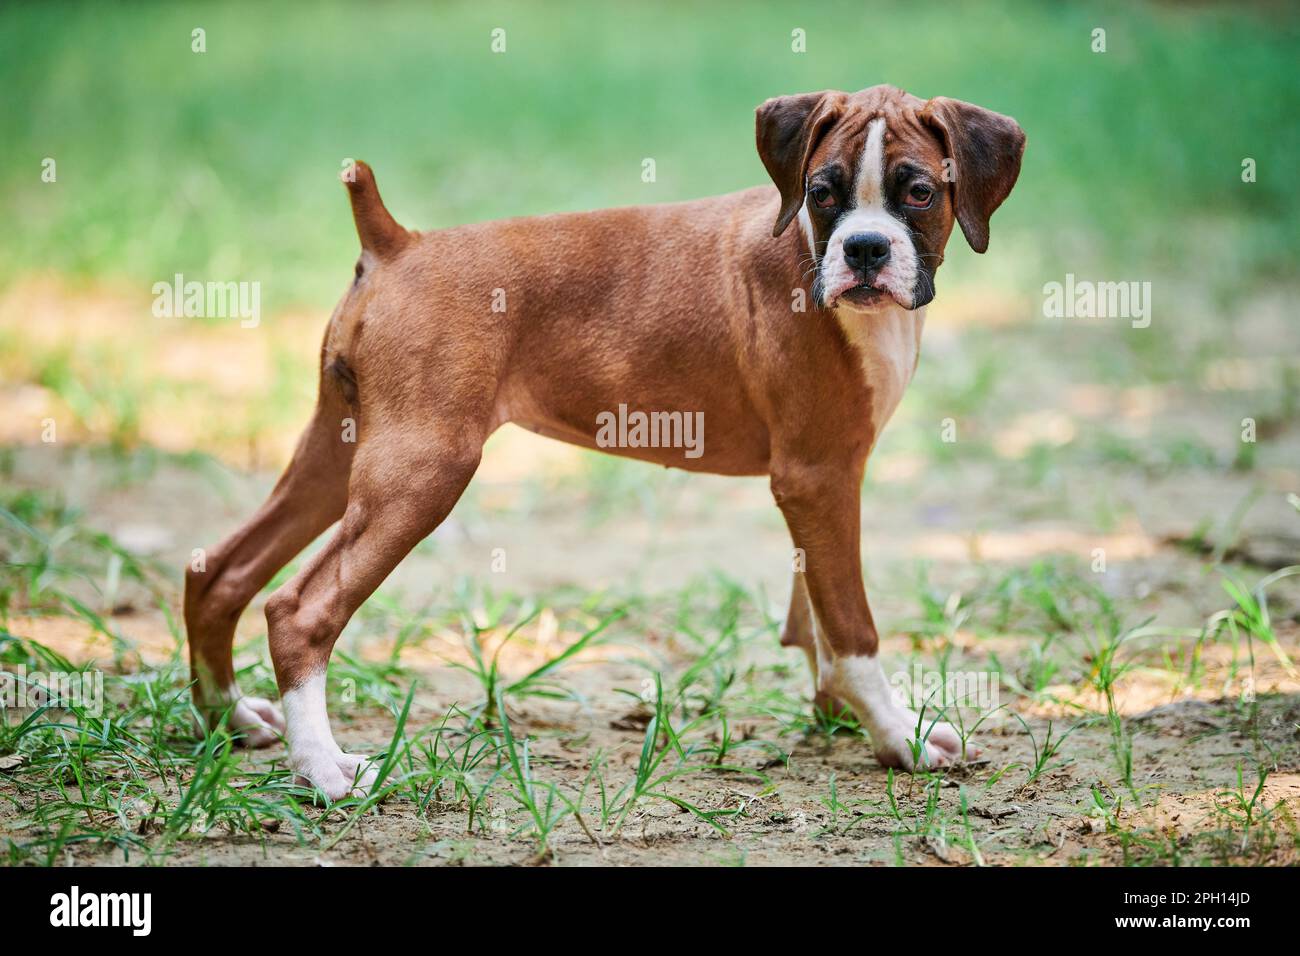 Boxer dog puppy full height side view portrait at outdoor park ...